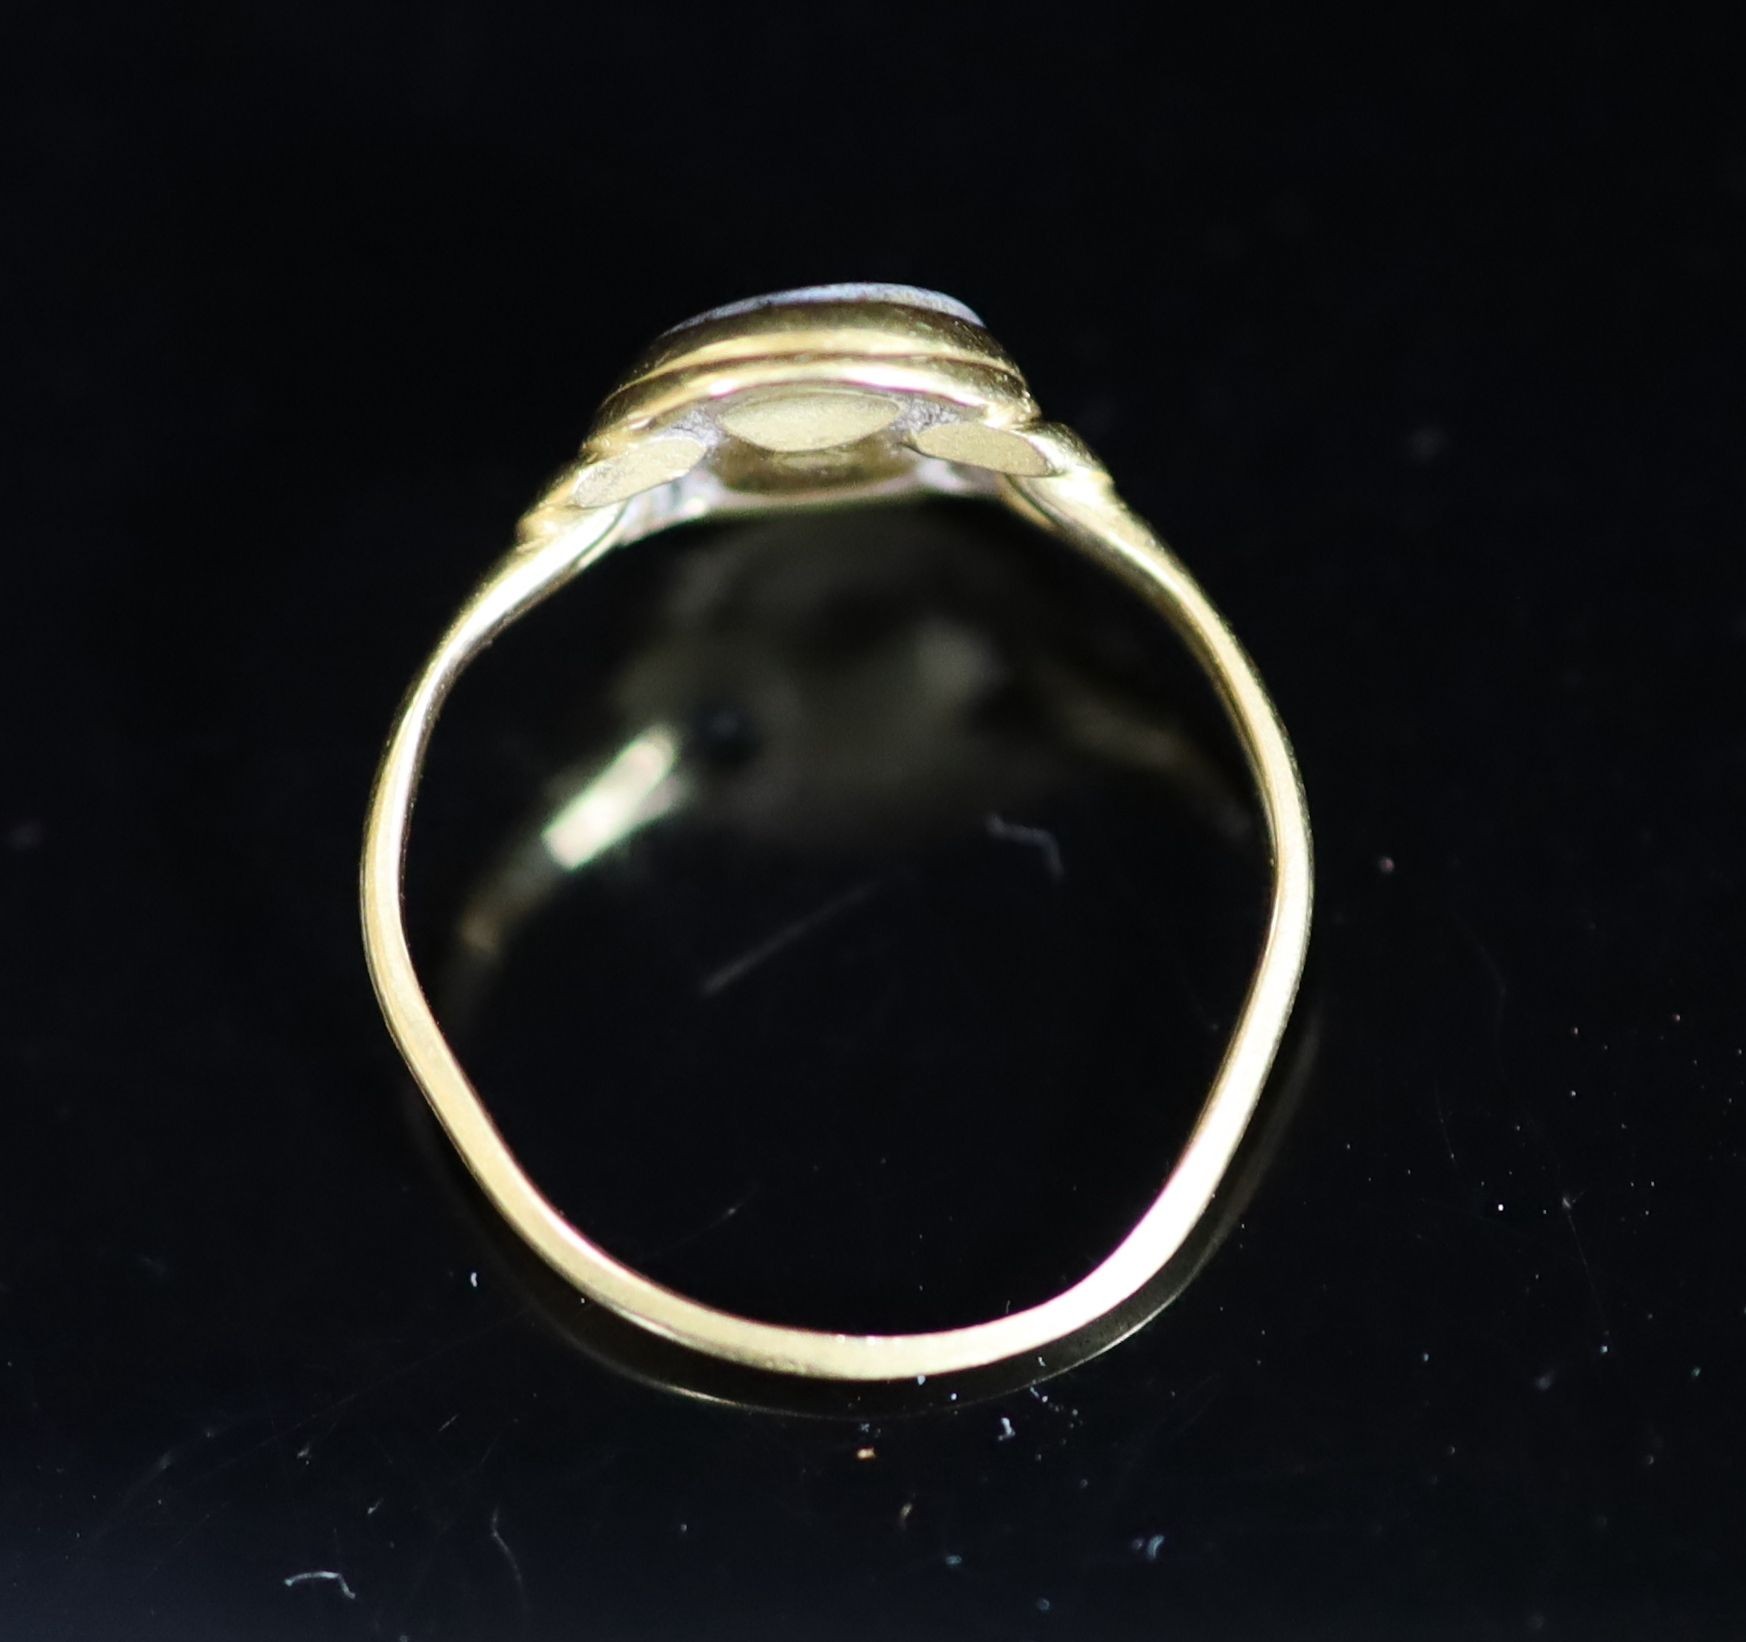 An antique gold and oval chalcedony set ring, carved with the name 'Amelia'